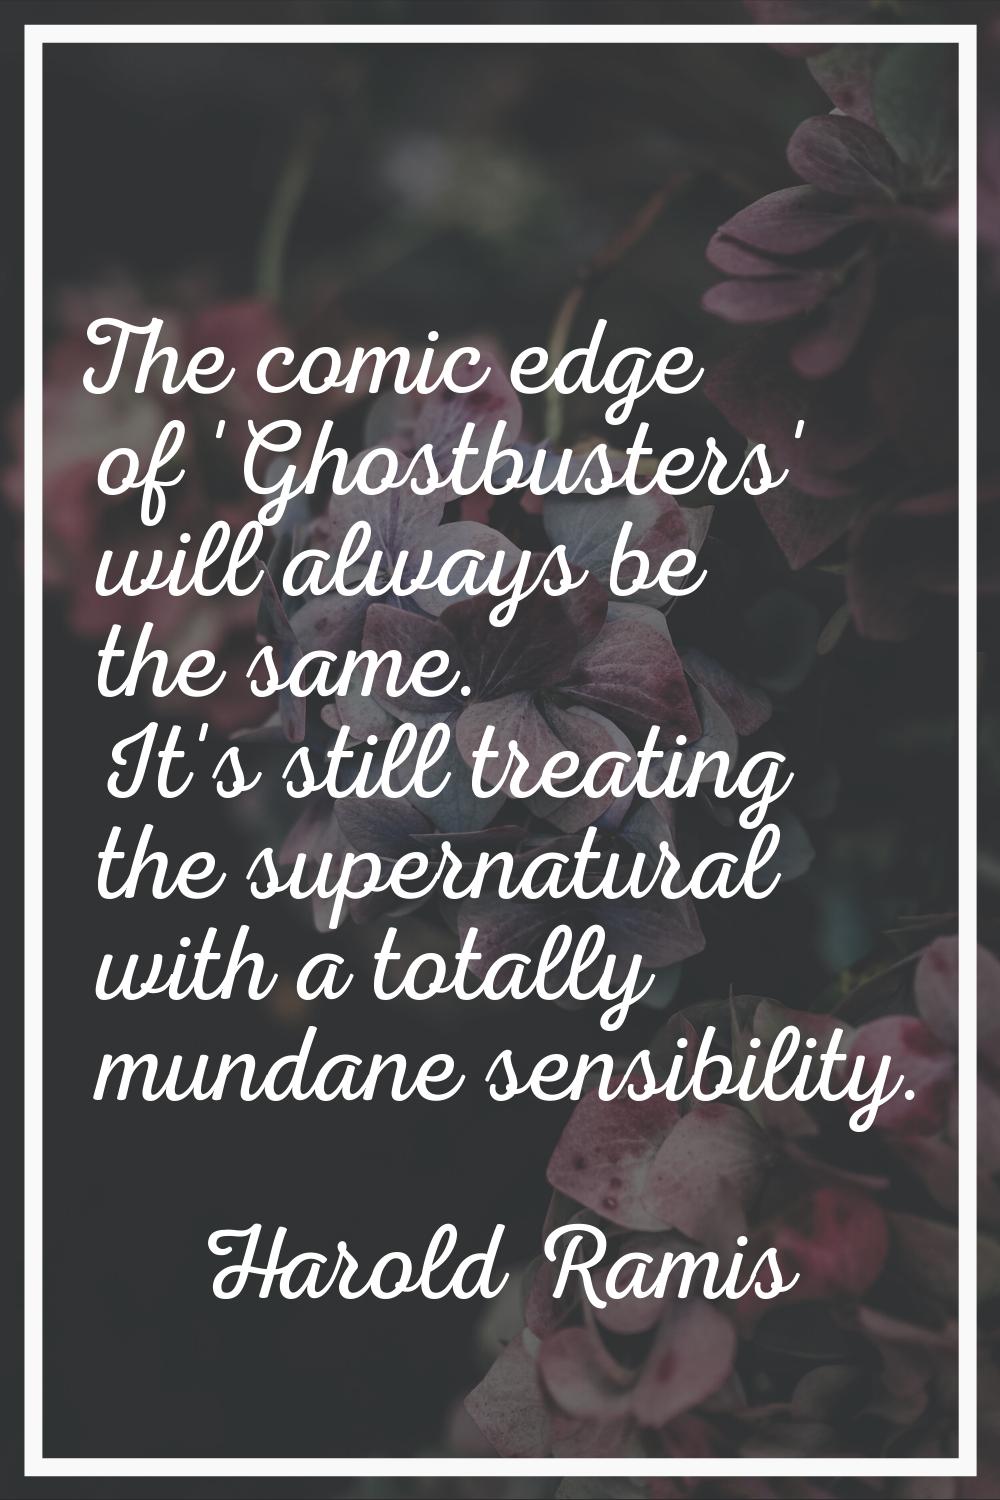 The comic edge of 'Ghostbusters' will always be the same. It's still treating the supernatural with